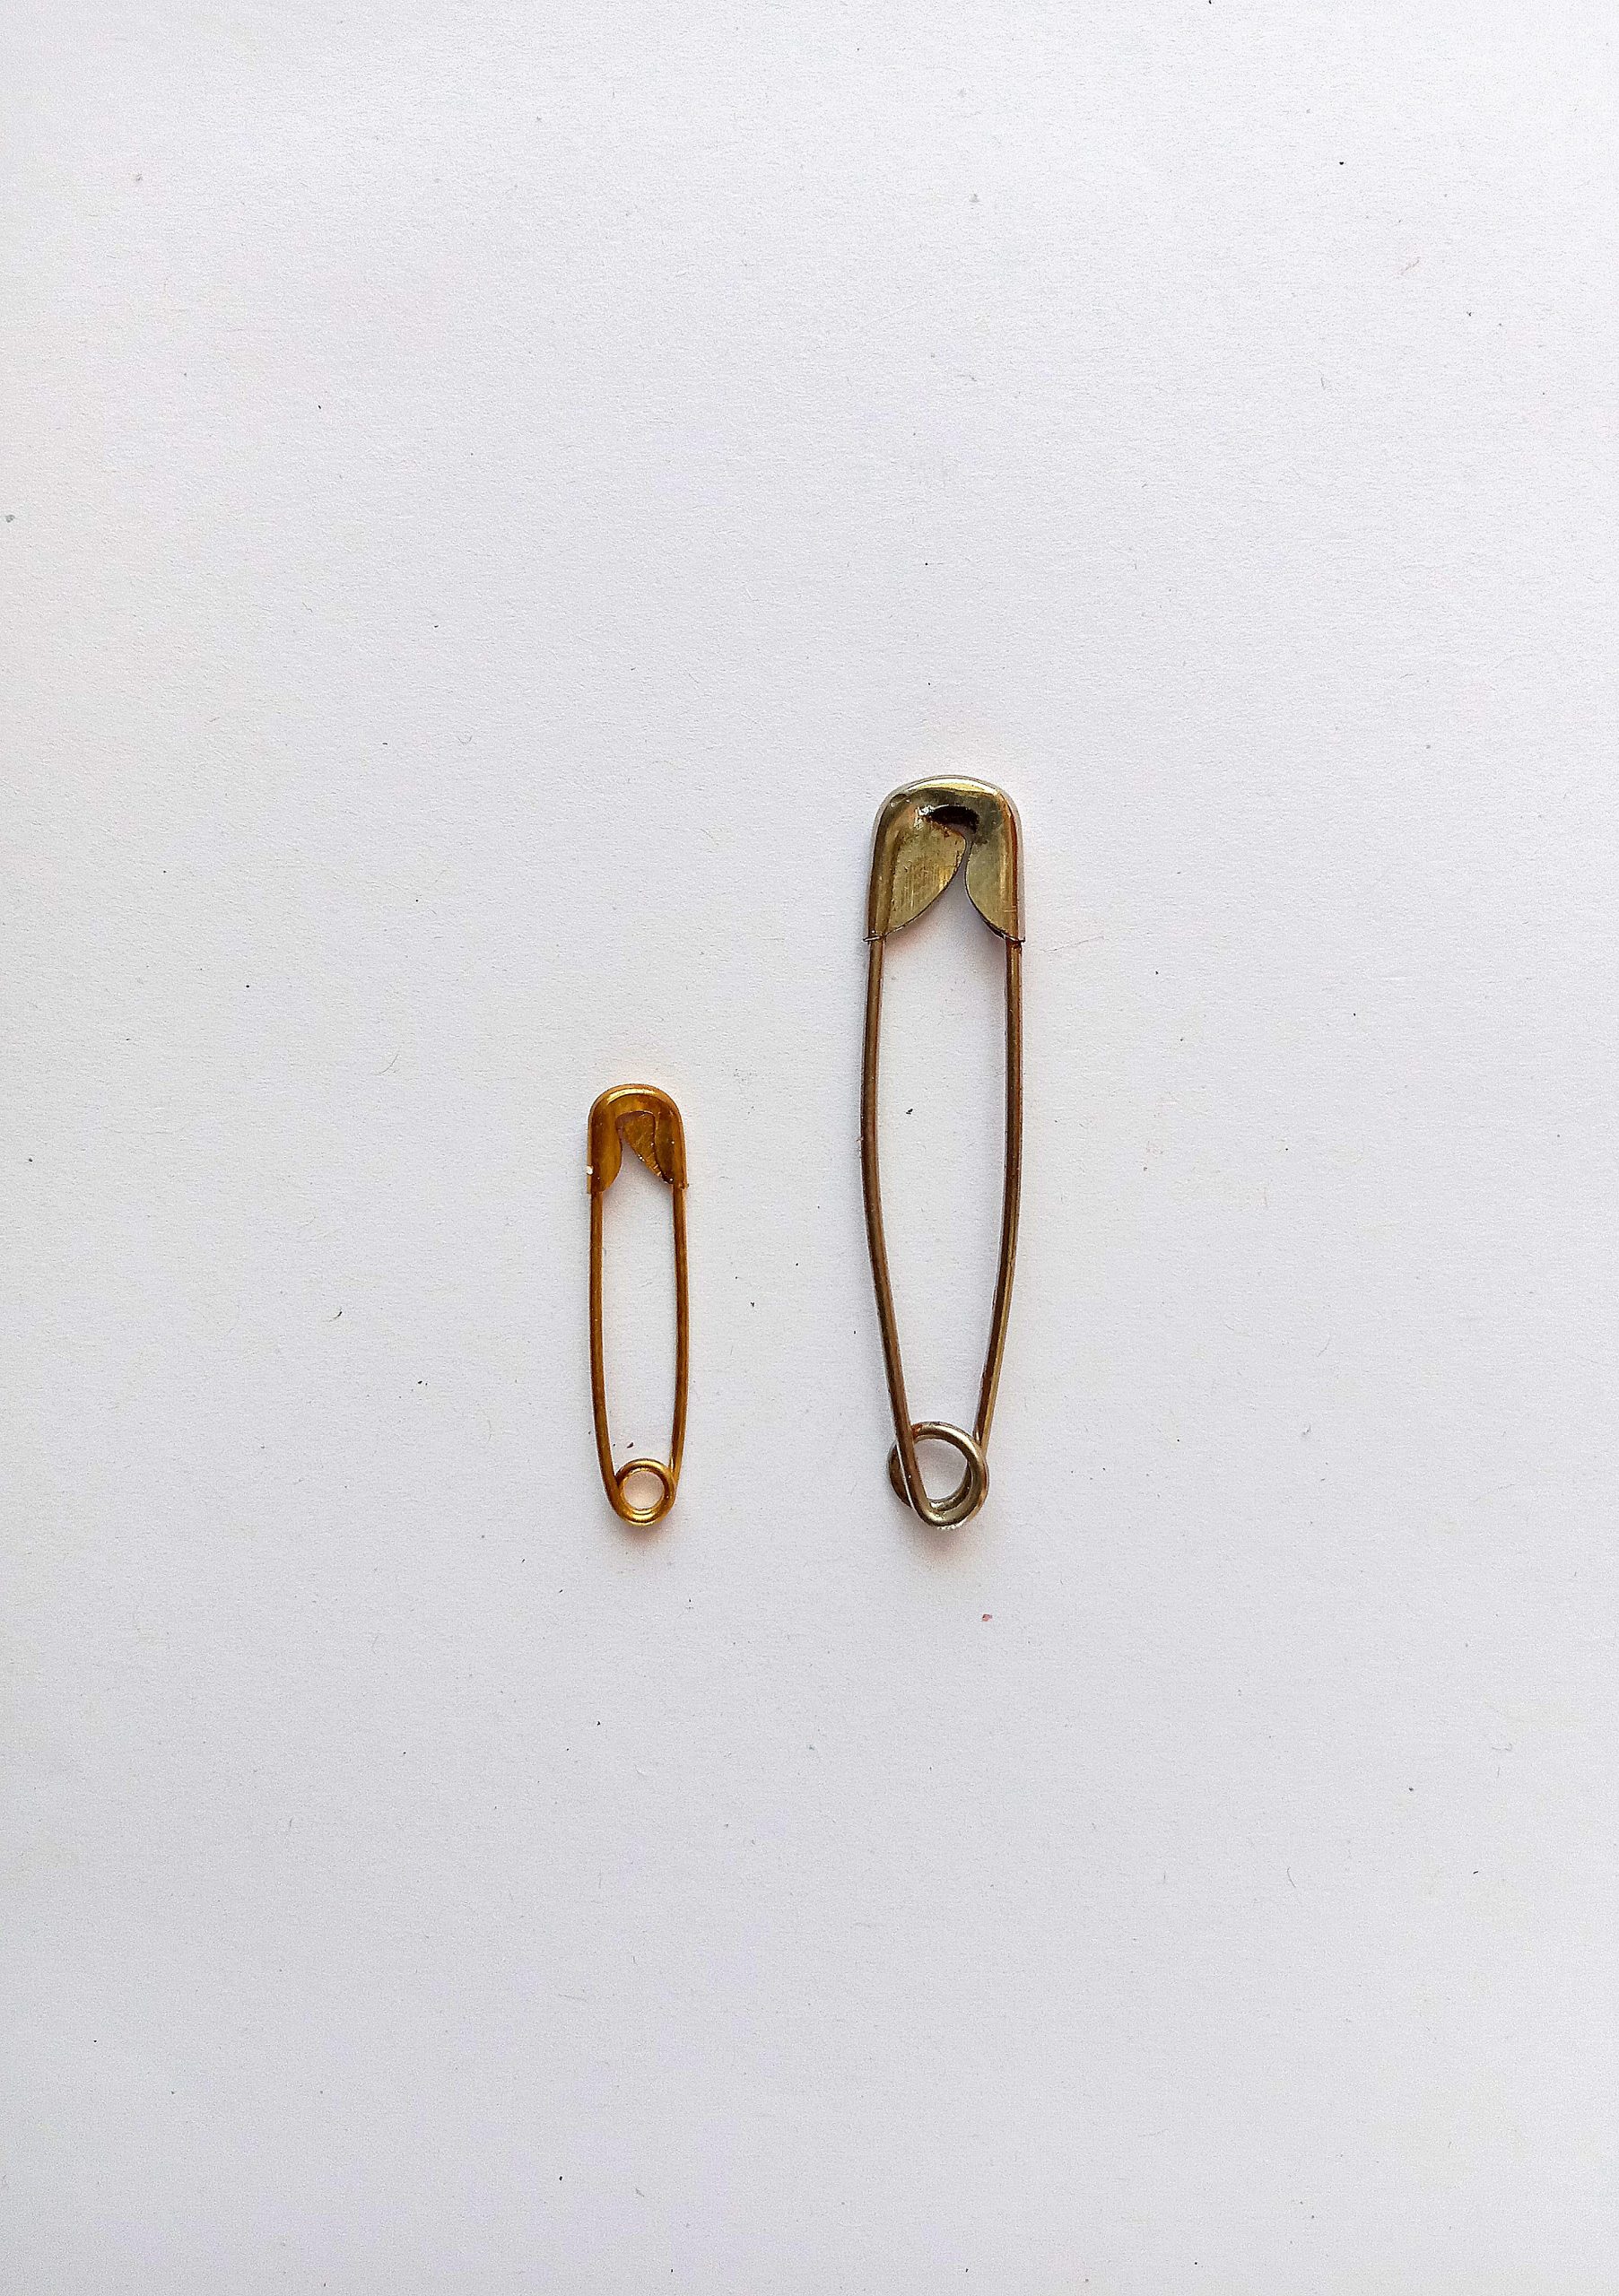 A pair of safety pins